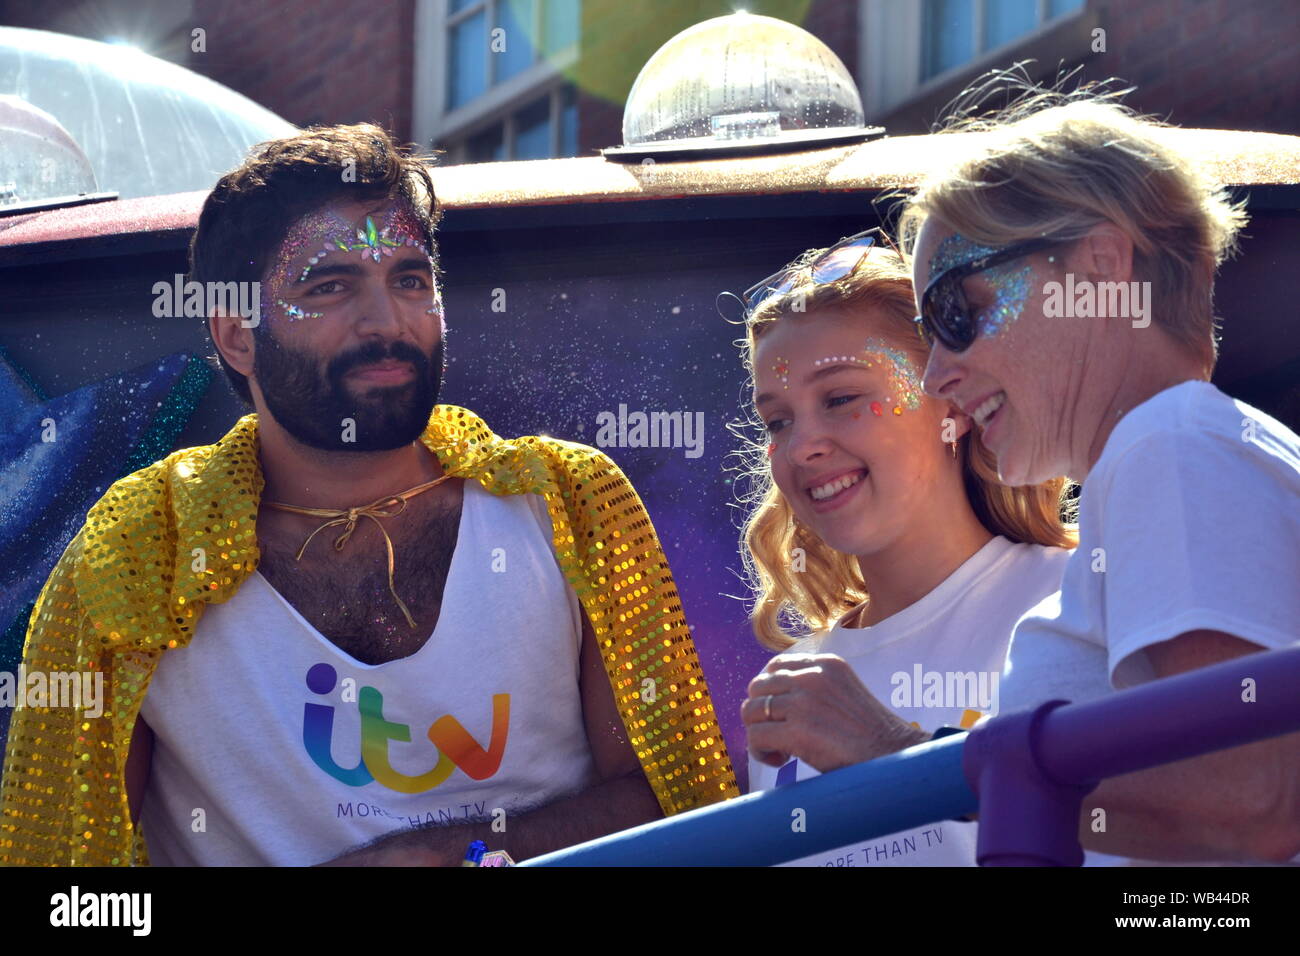 Coronation Street stars take part in the Manchester, uk, LGBT Pride Parade on 24th August, 2019. Charlie De Melo (left) who plays Imran Habeeb, wears a yellow cape as he talks to Sally Dynevor (right), who has played Sally Metcalfe in the soap since 1986, as her 24 year old daughter, Phoebe, stands between them. Stock Photo